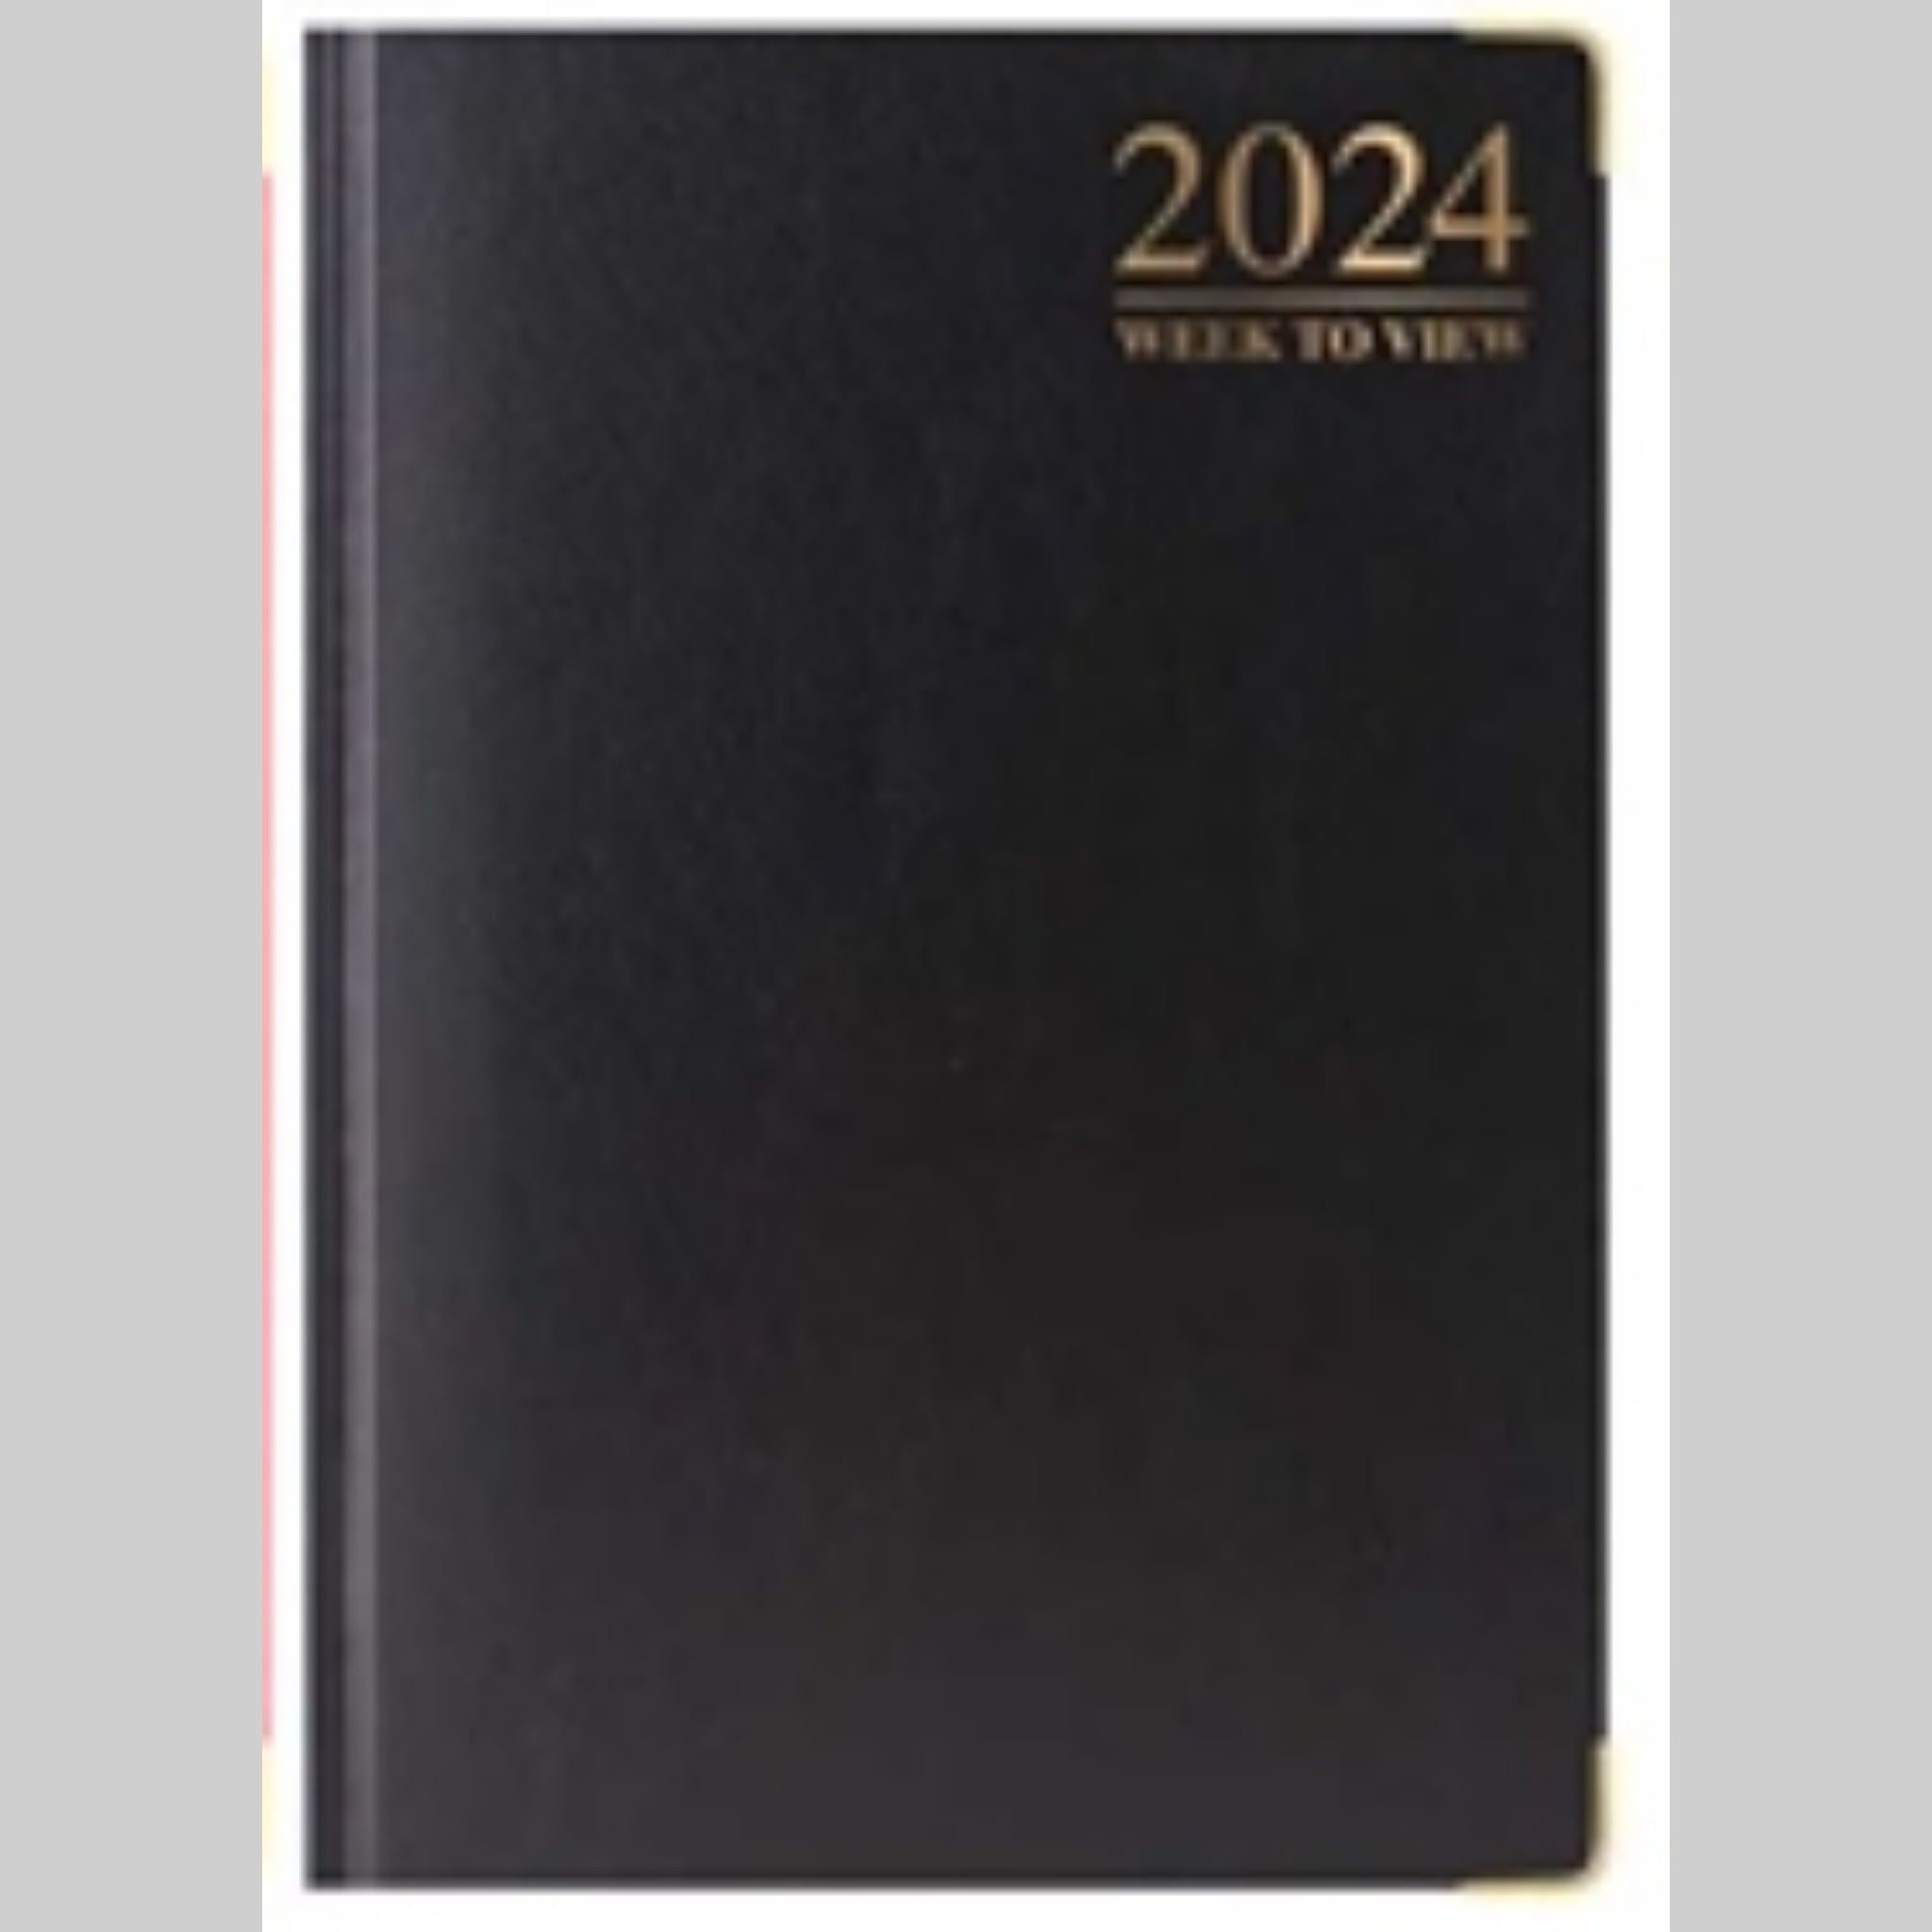 Beclen Harp 2024 A5 Size Week To View/WTV & Day A Page/ DAP Personal Luxury Effect Diary